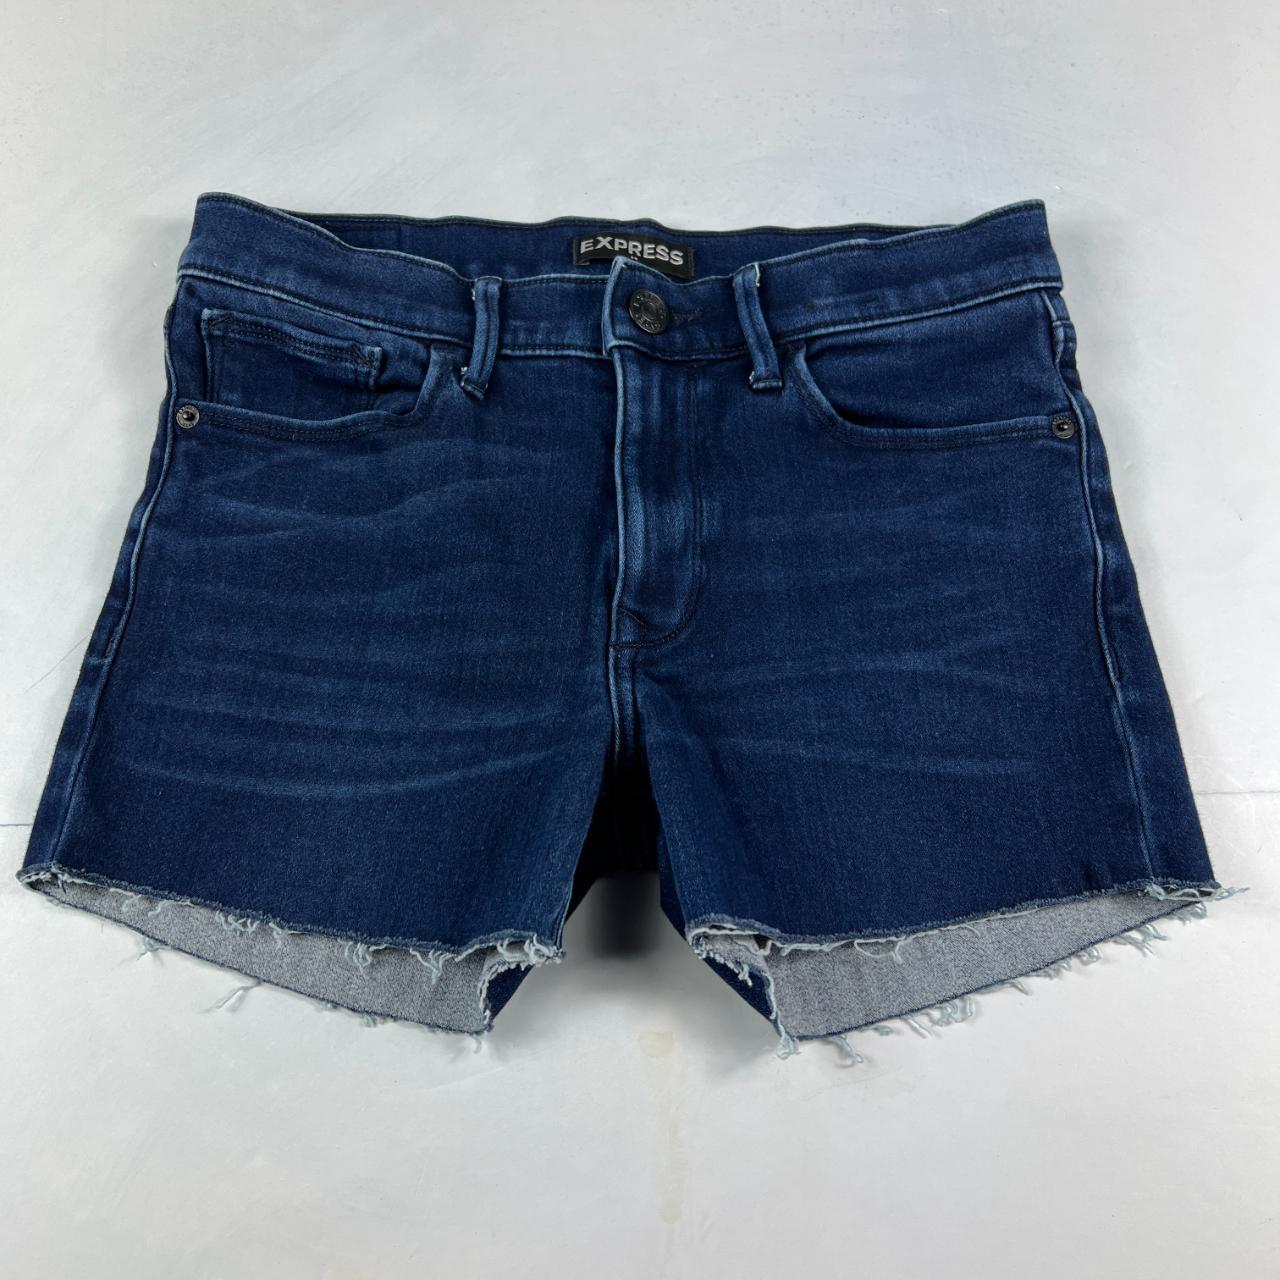 Women's Pull On Jean Shorts Summer Skinny Stretchy Denim Shorts Comfy  Drawstring Elastic Waist Shorts with Pockets at Amazon Women's Clothing  store